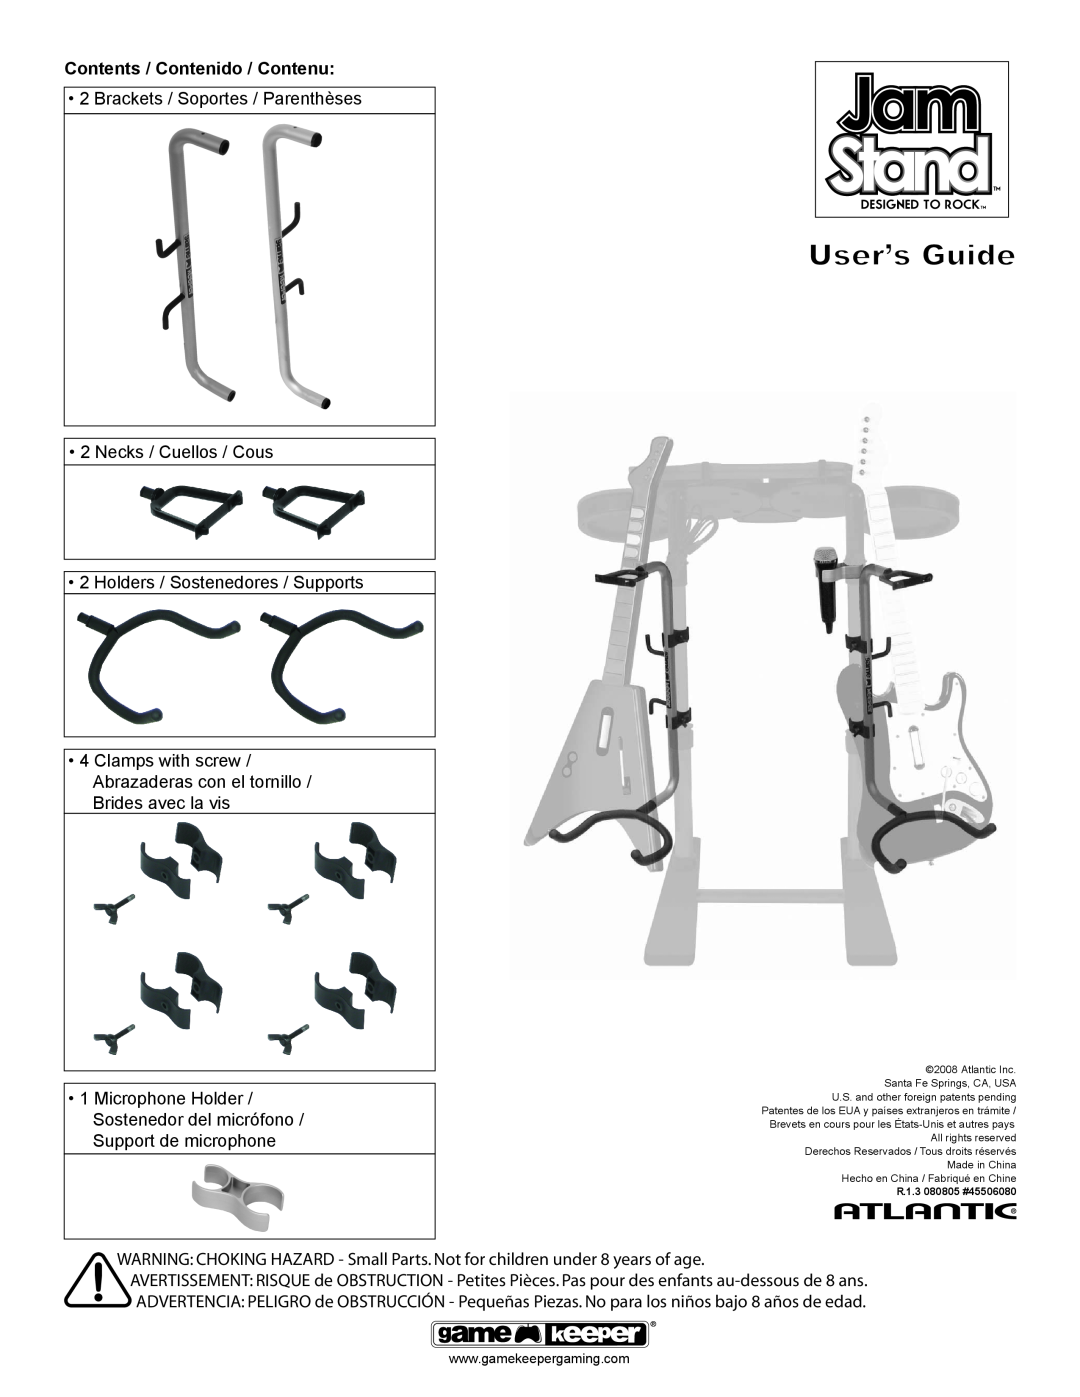 Atlantic Necks, Brackets, Holders, Clamps with screw, Microphone Holder manual Contents / Contenido / Contenu, User’s Guide 